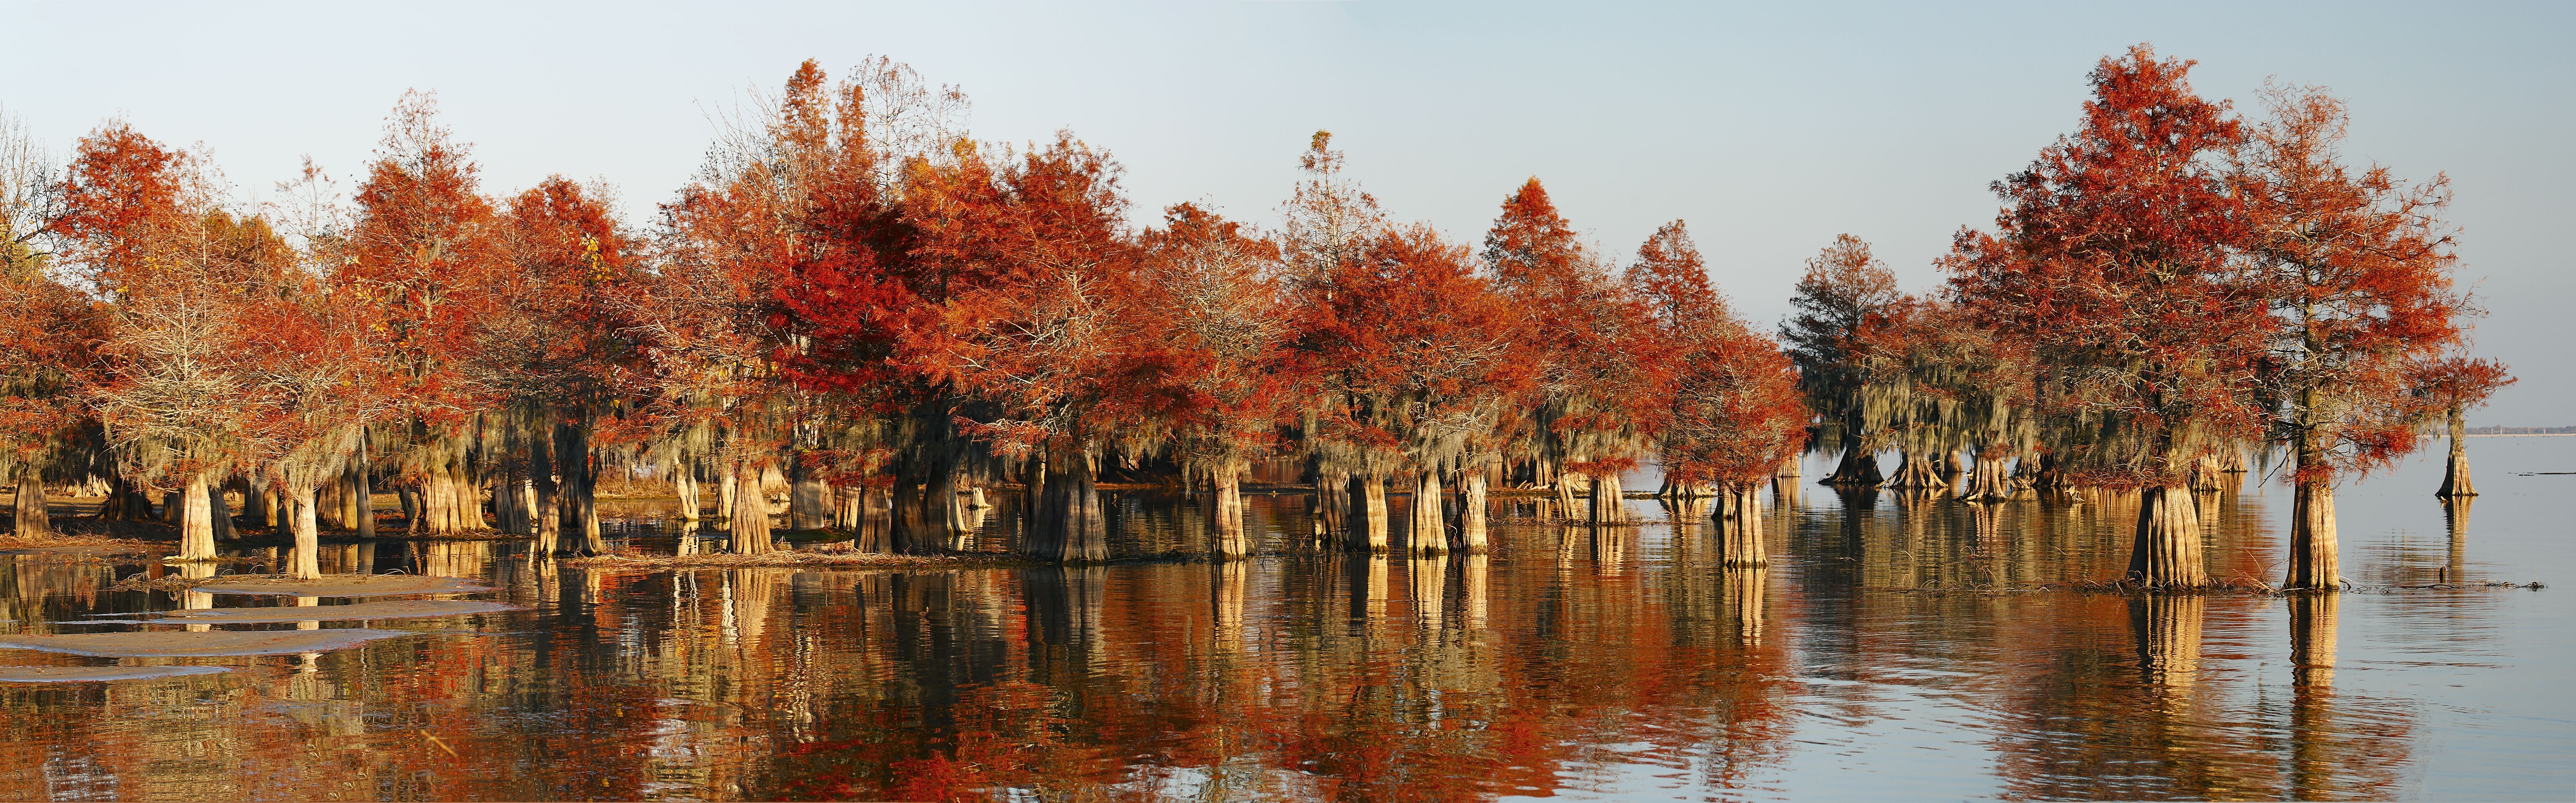 Bald Cypress forest in autumn